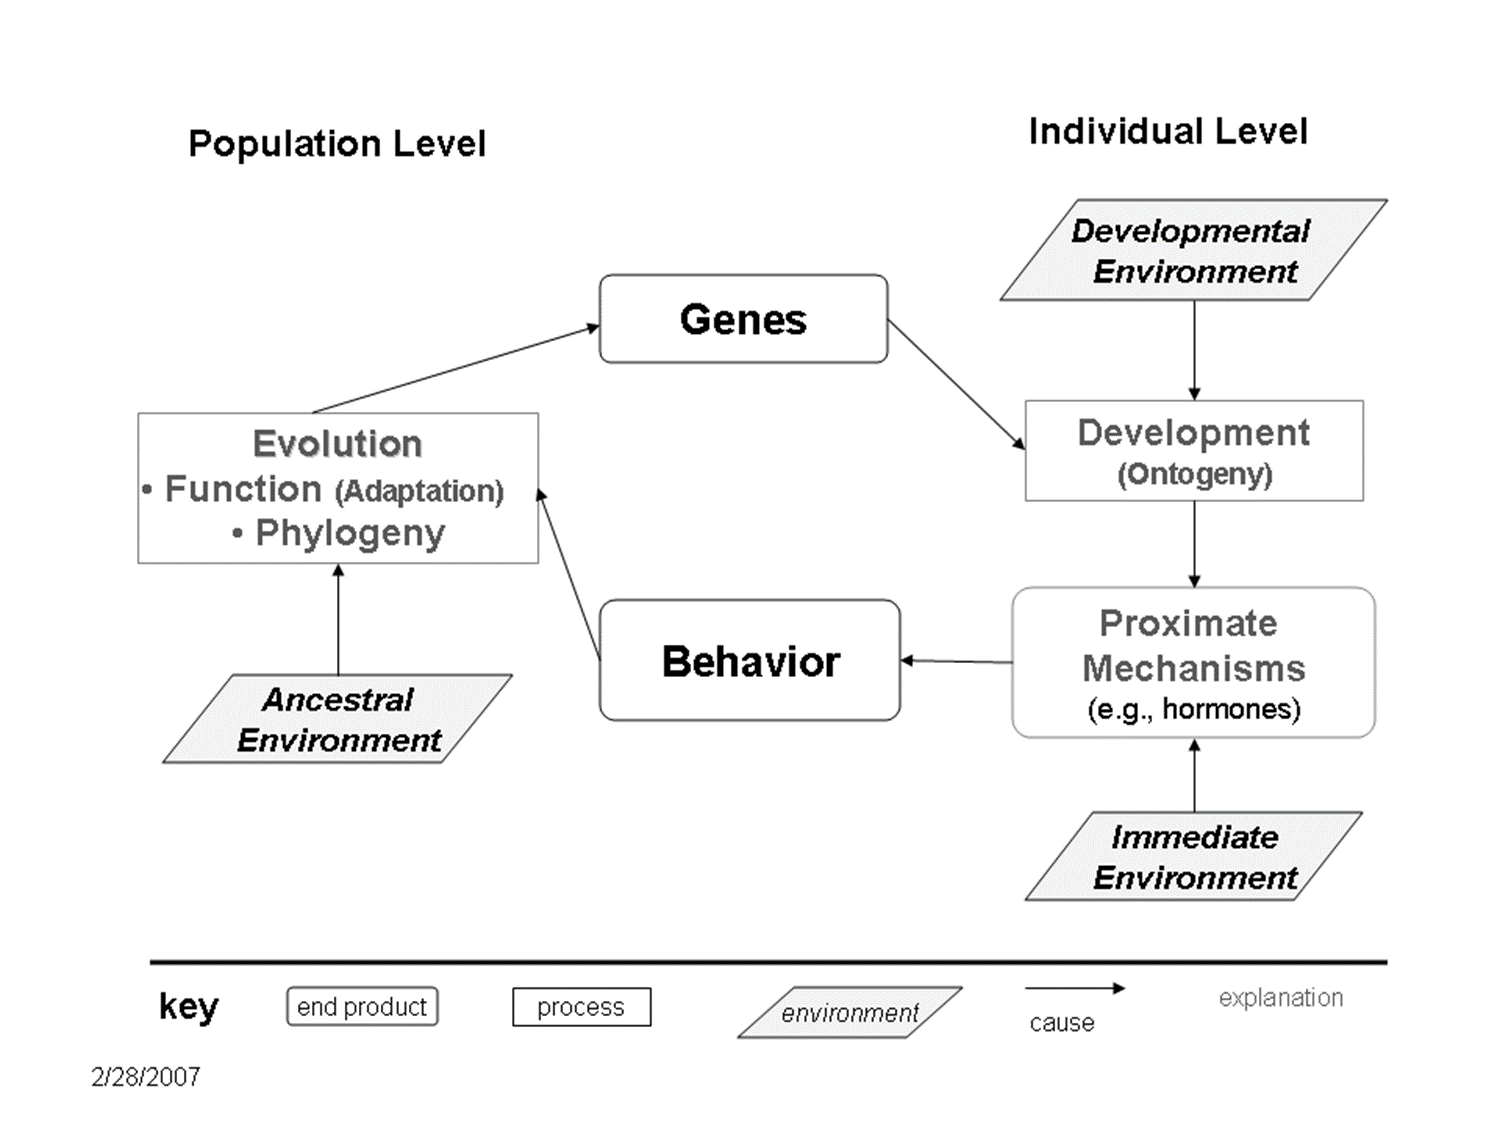 At an individual level, the developmental environment impacts development/ontogeny. The ontogeny and immediate environment impact proximate mechanisms, which impacts behavior. Behavior and the ancestral environment impact evolution (ie function and phylogeny). Evolution impacts genes, which impacts ontogeny.